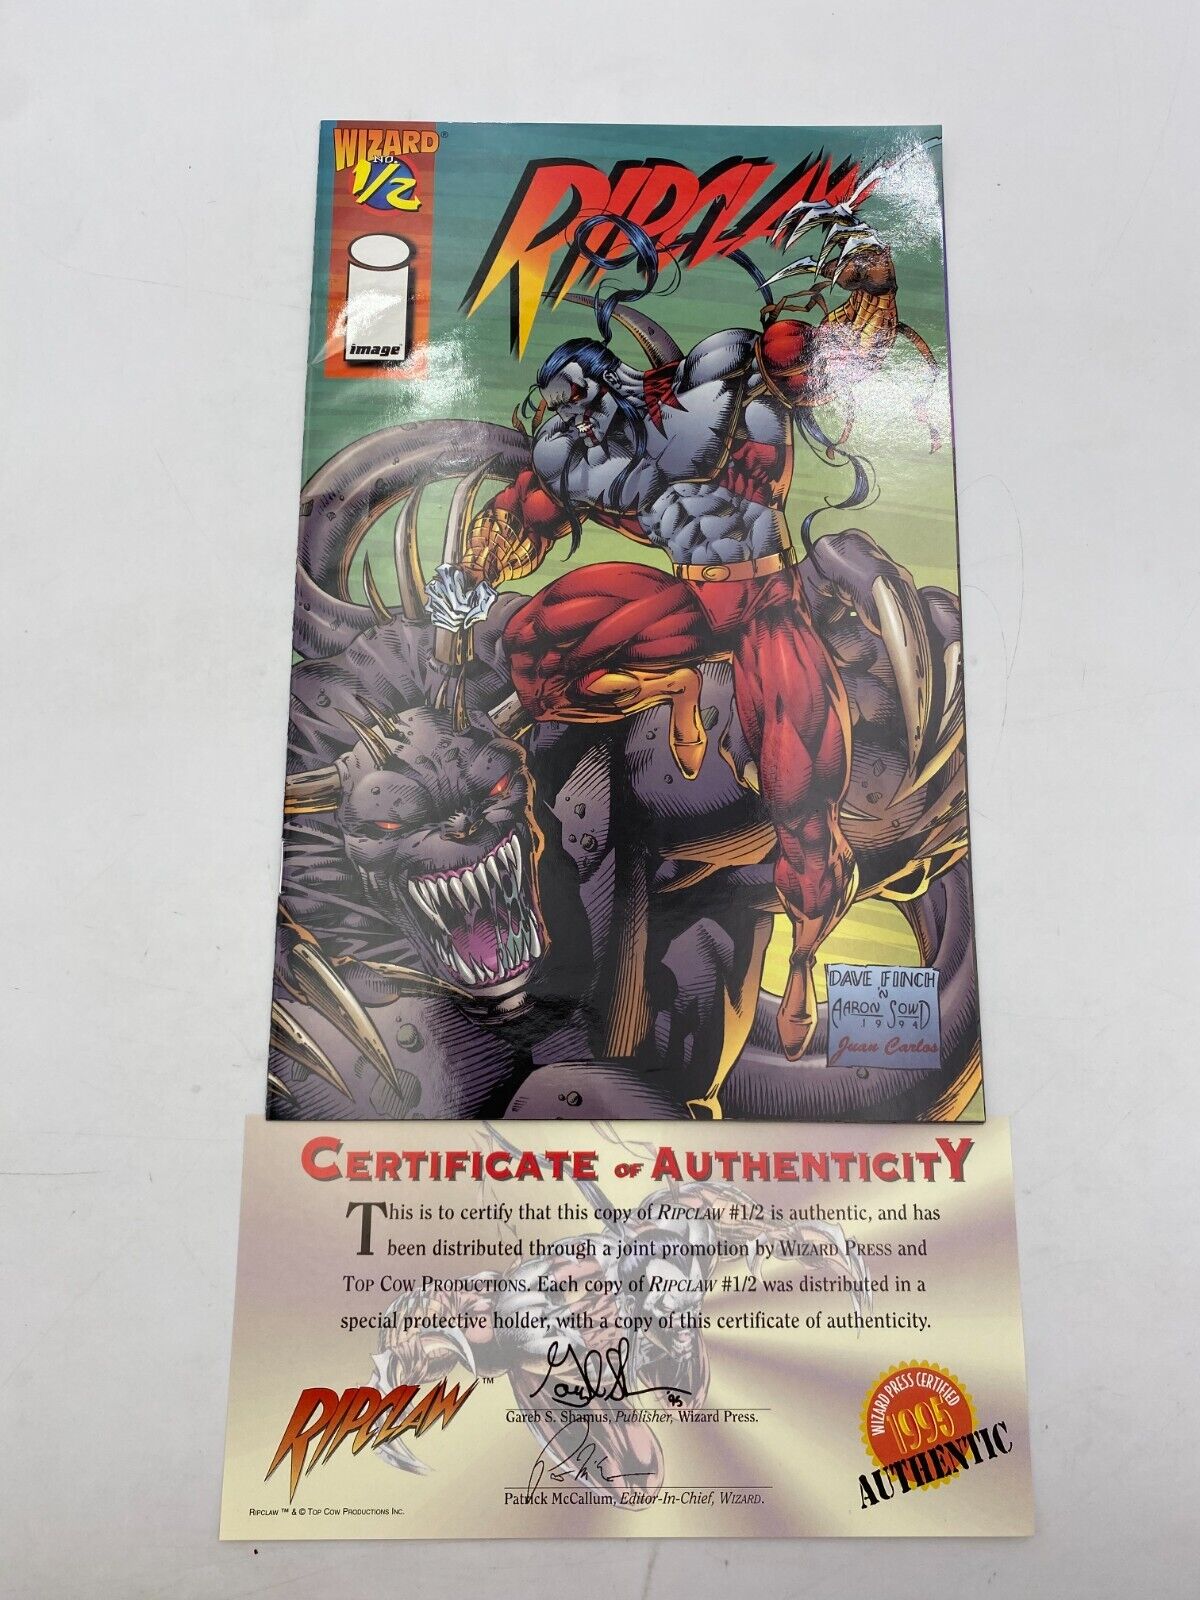 Ripclaw 1/2 (1995) - includes Wizard Certificate Of Authenticity